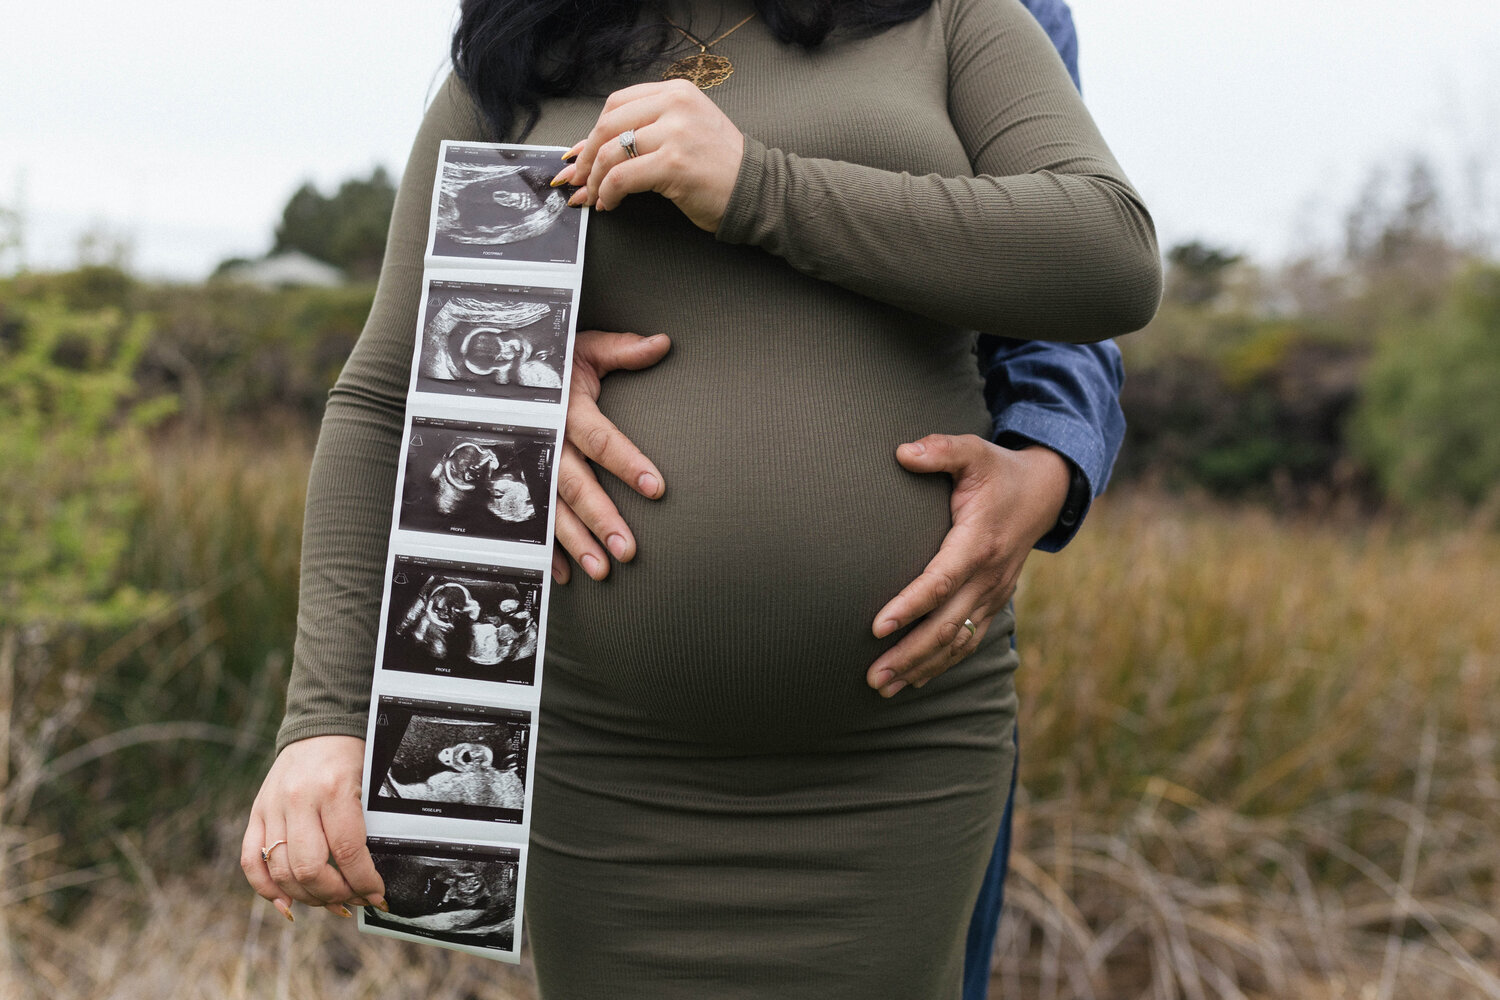  Pregnant couple posing with ultra sound photos against field background 